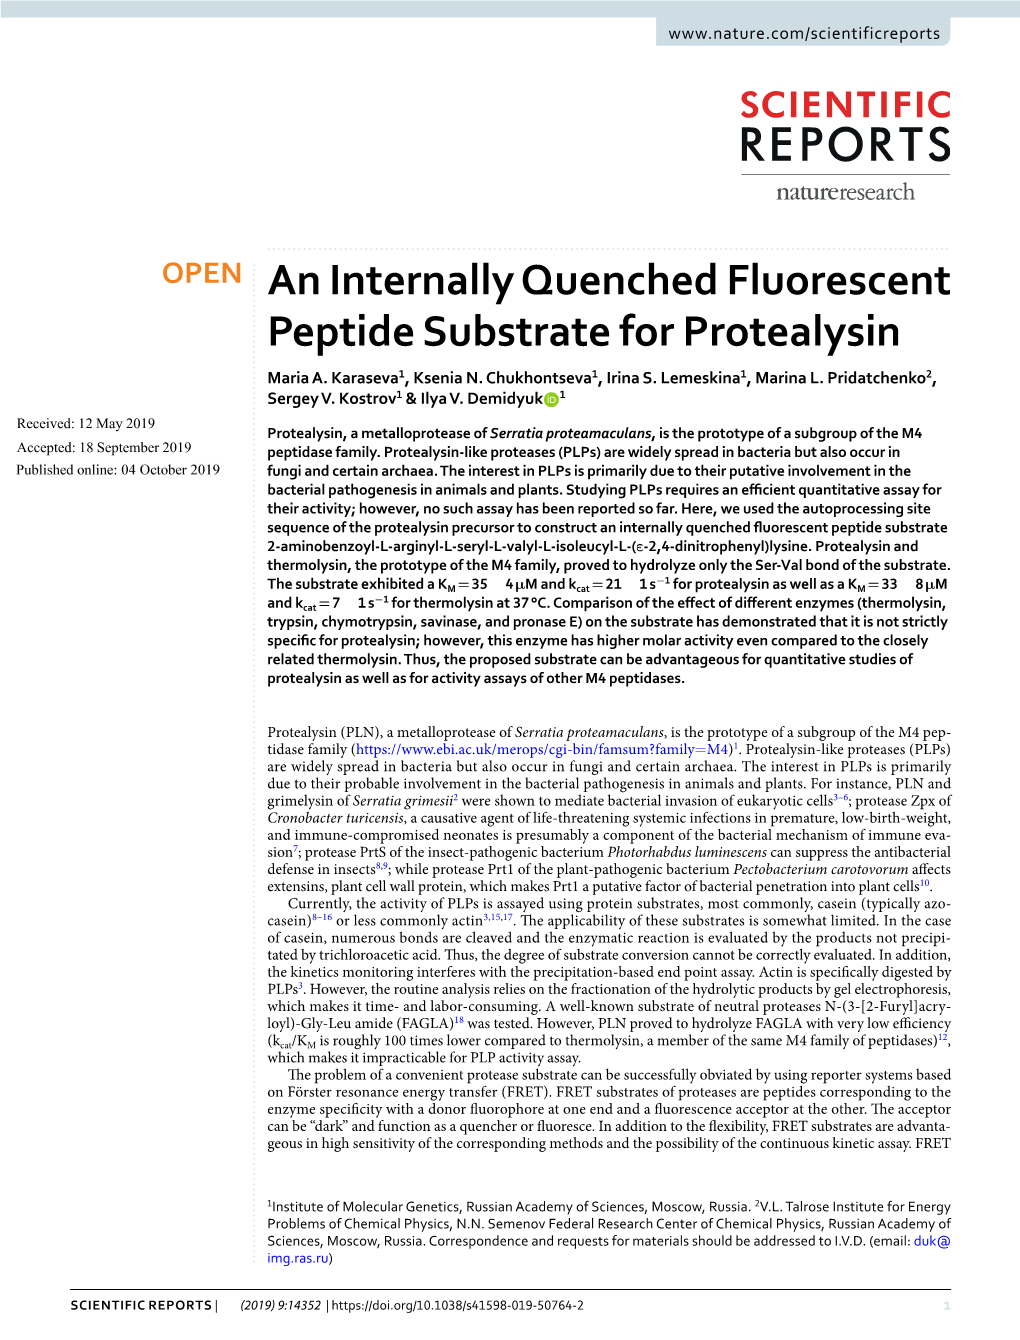 An Internally Quenched Fluorescent Peptide Substrate for Protealysin Maria A